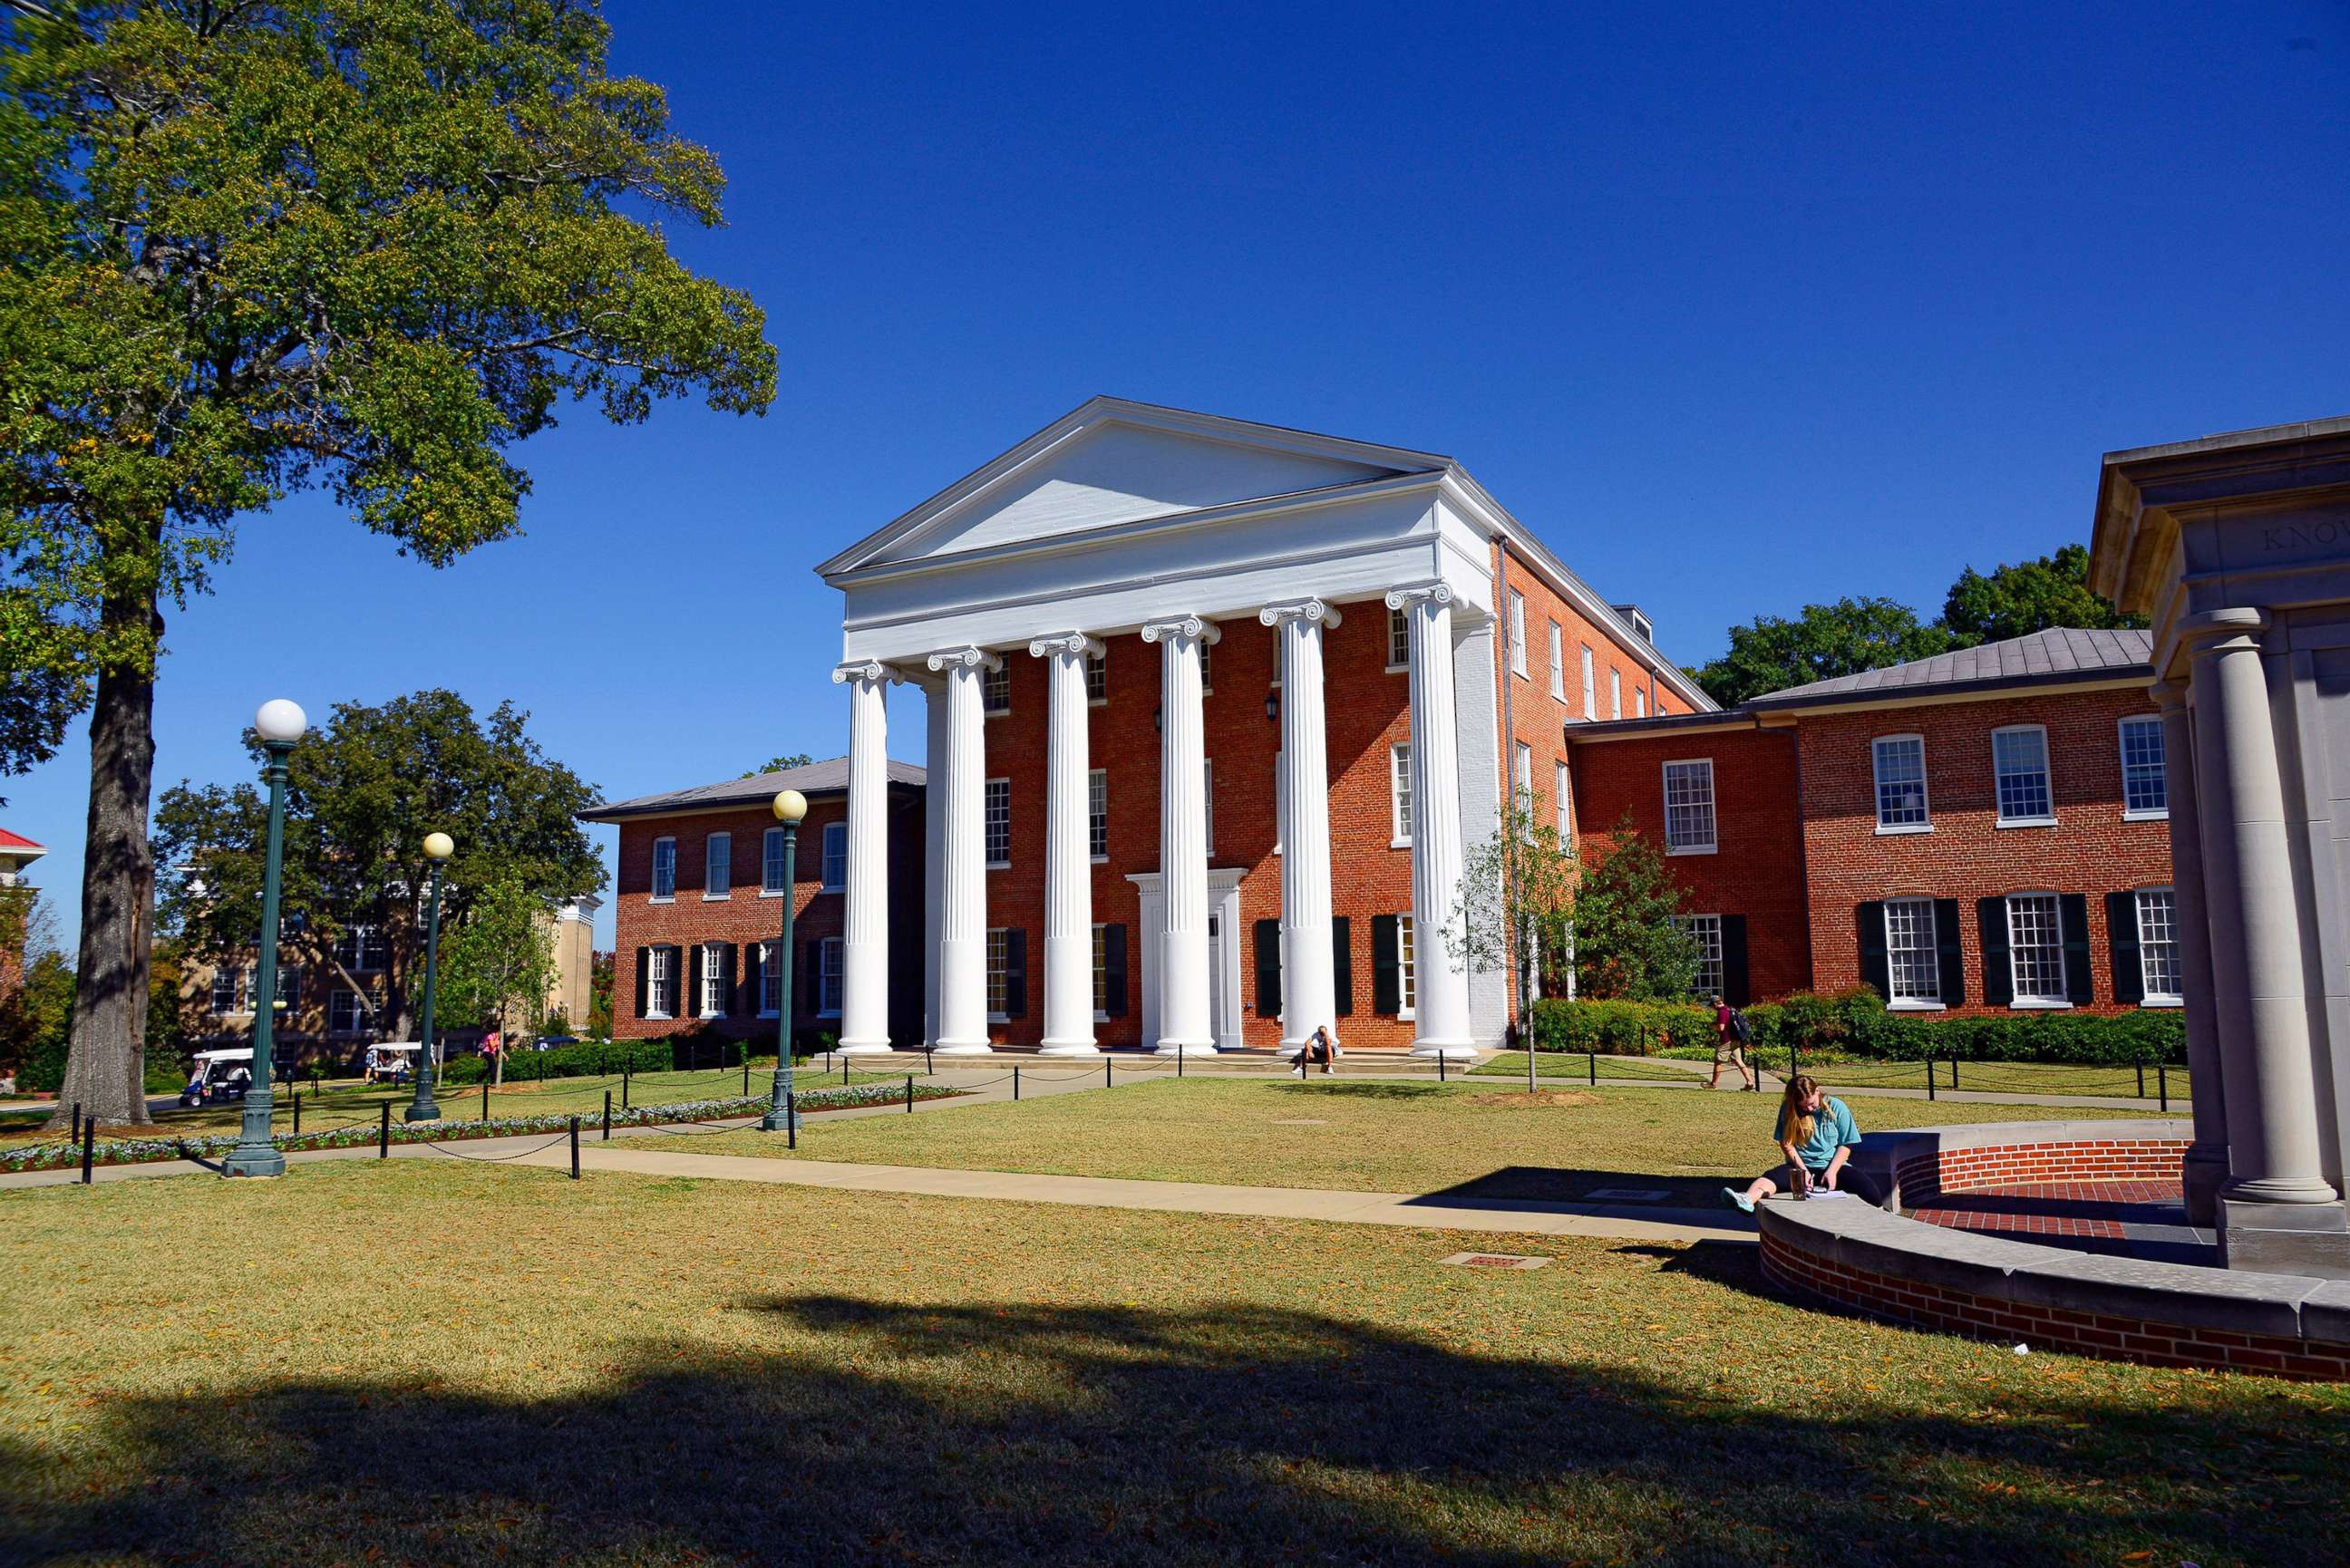 PHOTO: The Lyceum Building is shown on the Ole Miss campus in Oxford, MS.